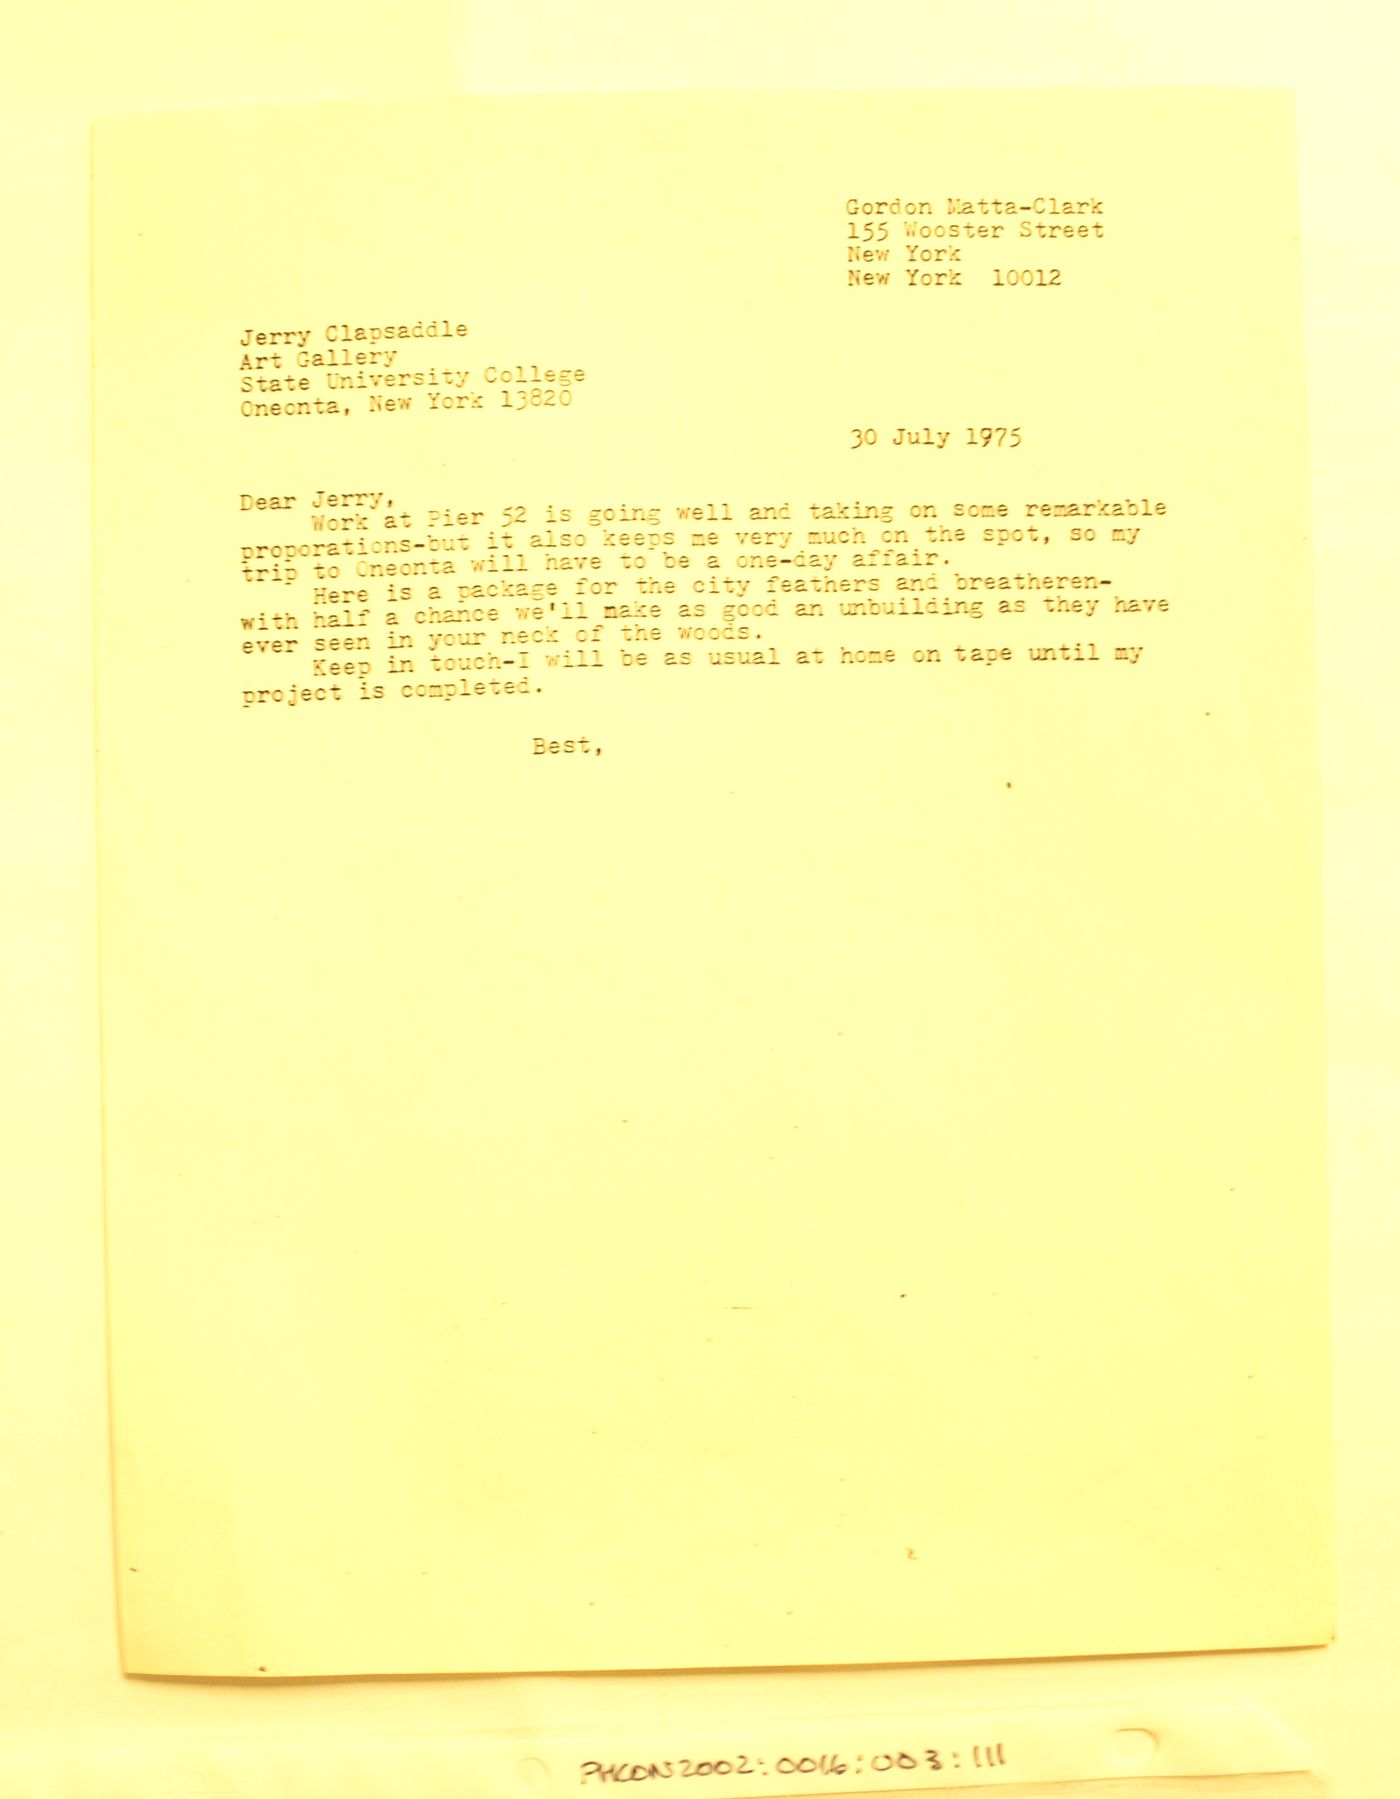 Letter from Gordon Matta-Clark to Jerry Clapsaddle